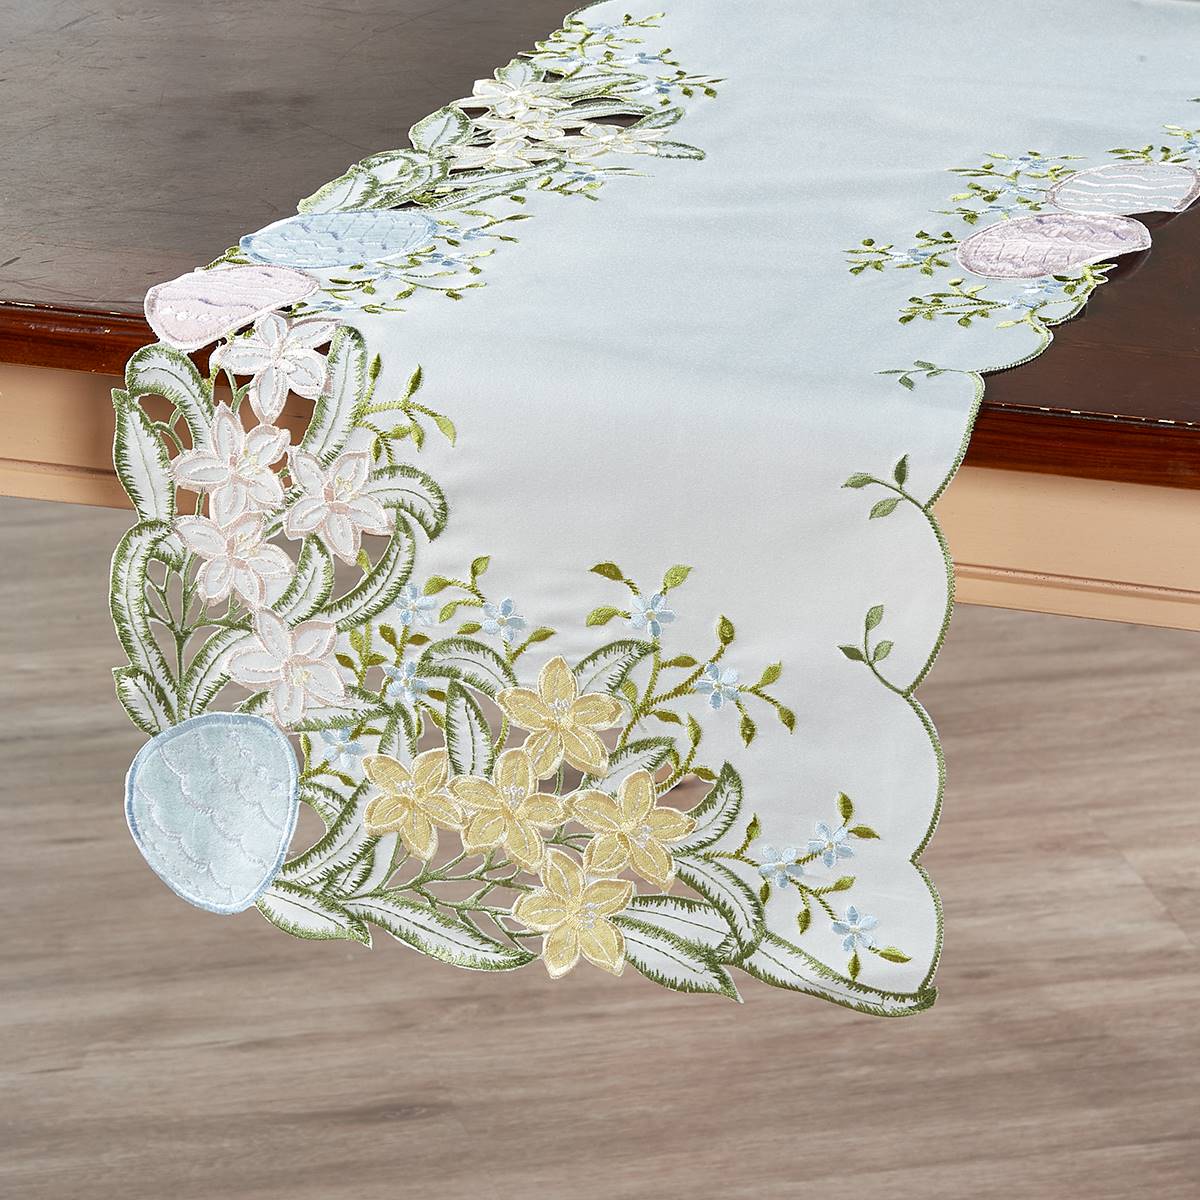 LintexTrends Collections Easter Eggs & Flowers Table Runner-14x72